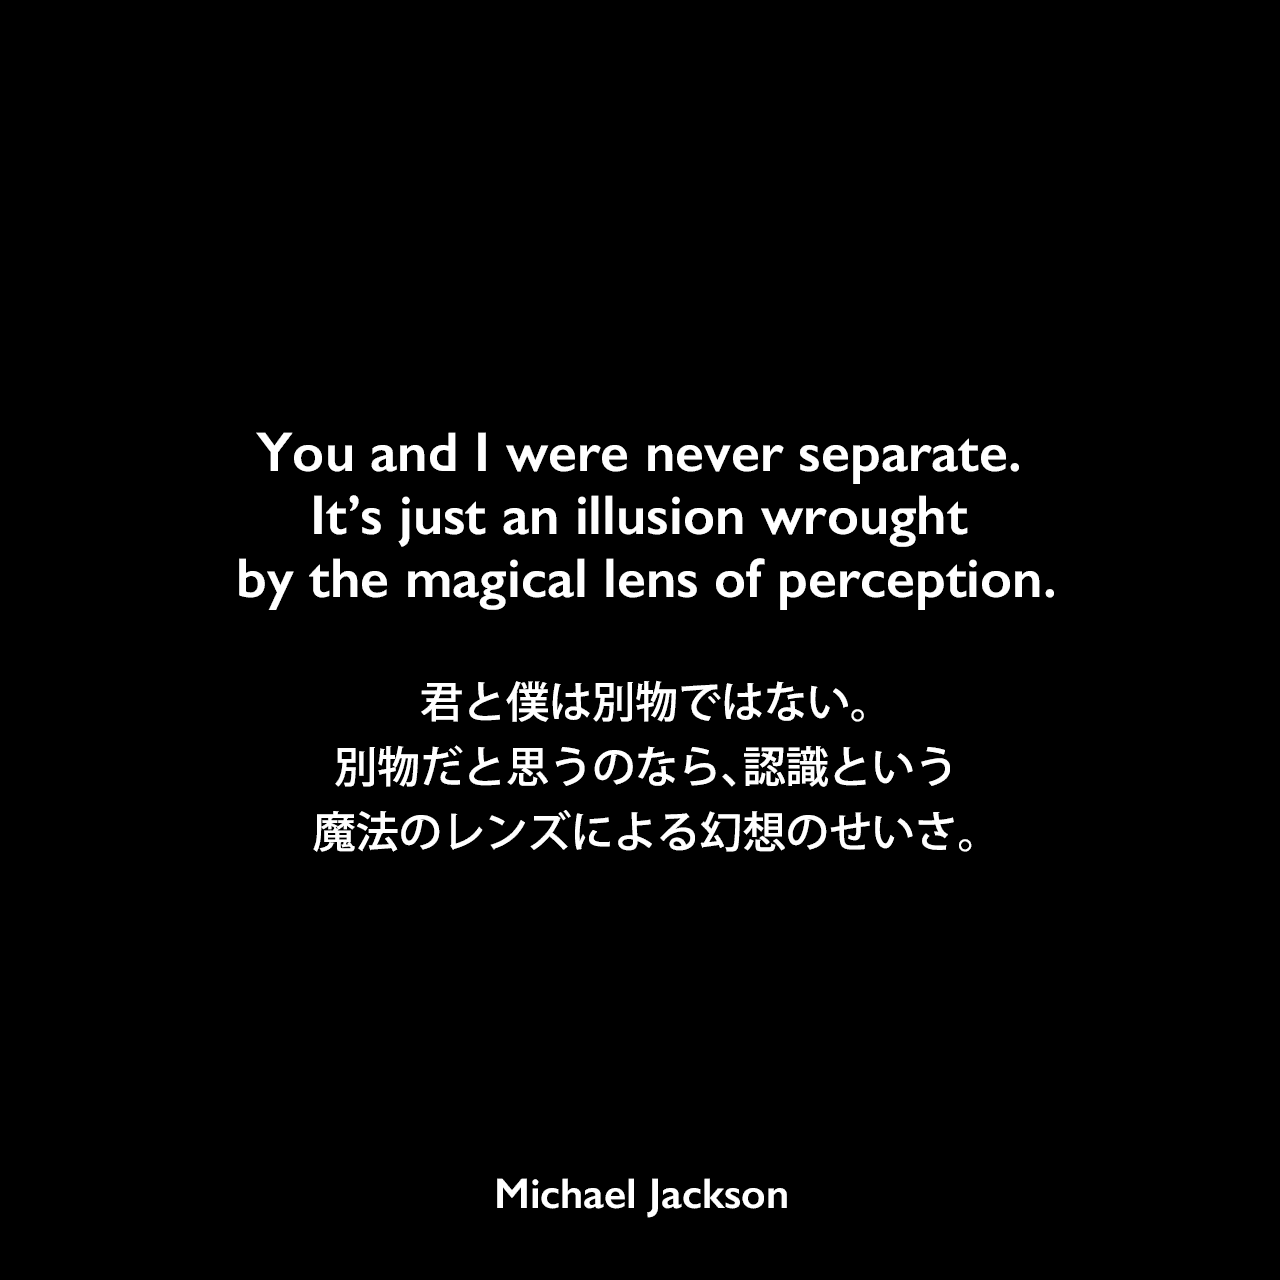 You and I were never separate. It’s just an illusion wrought by the magical lens of perception.君と僕は別物ではない。別物だと思うのなら、認識という魔法のレンズによる幻想のせいさ。Michael Jackson